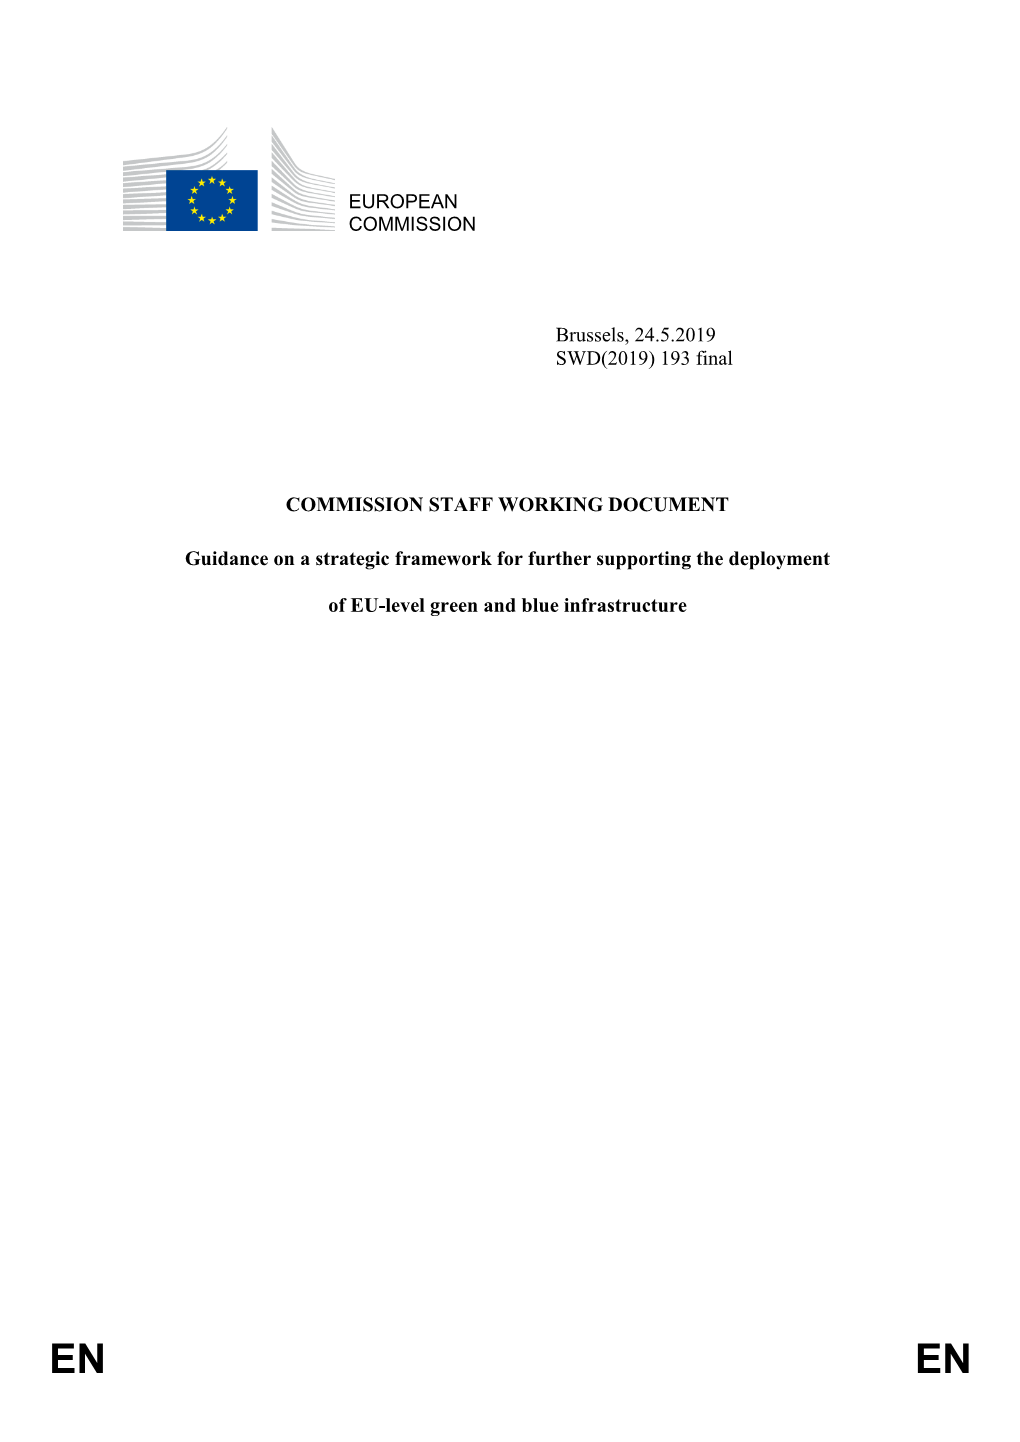 Guidance on a Strategic Framework for Further Supporting the Deployment of EU-Level Green and Blue